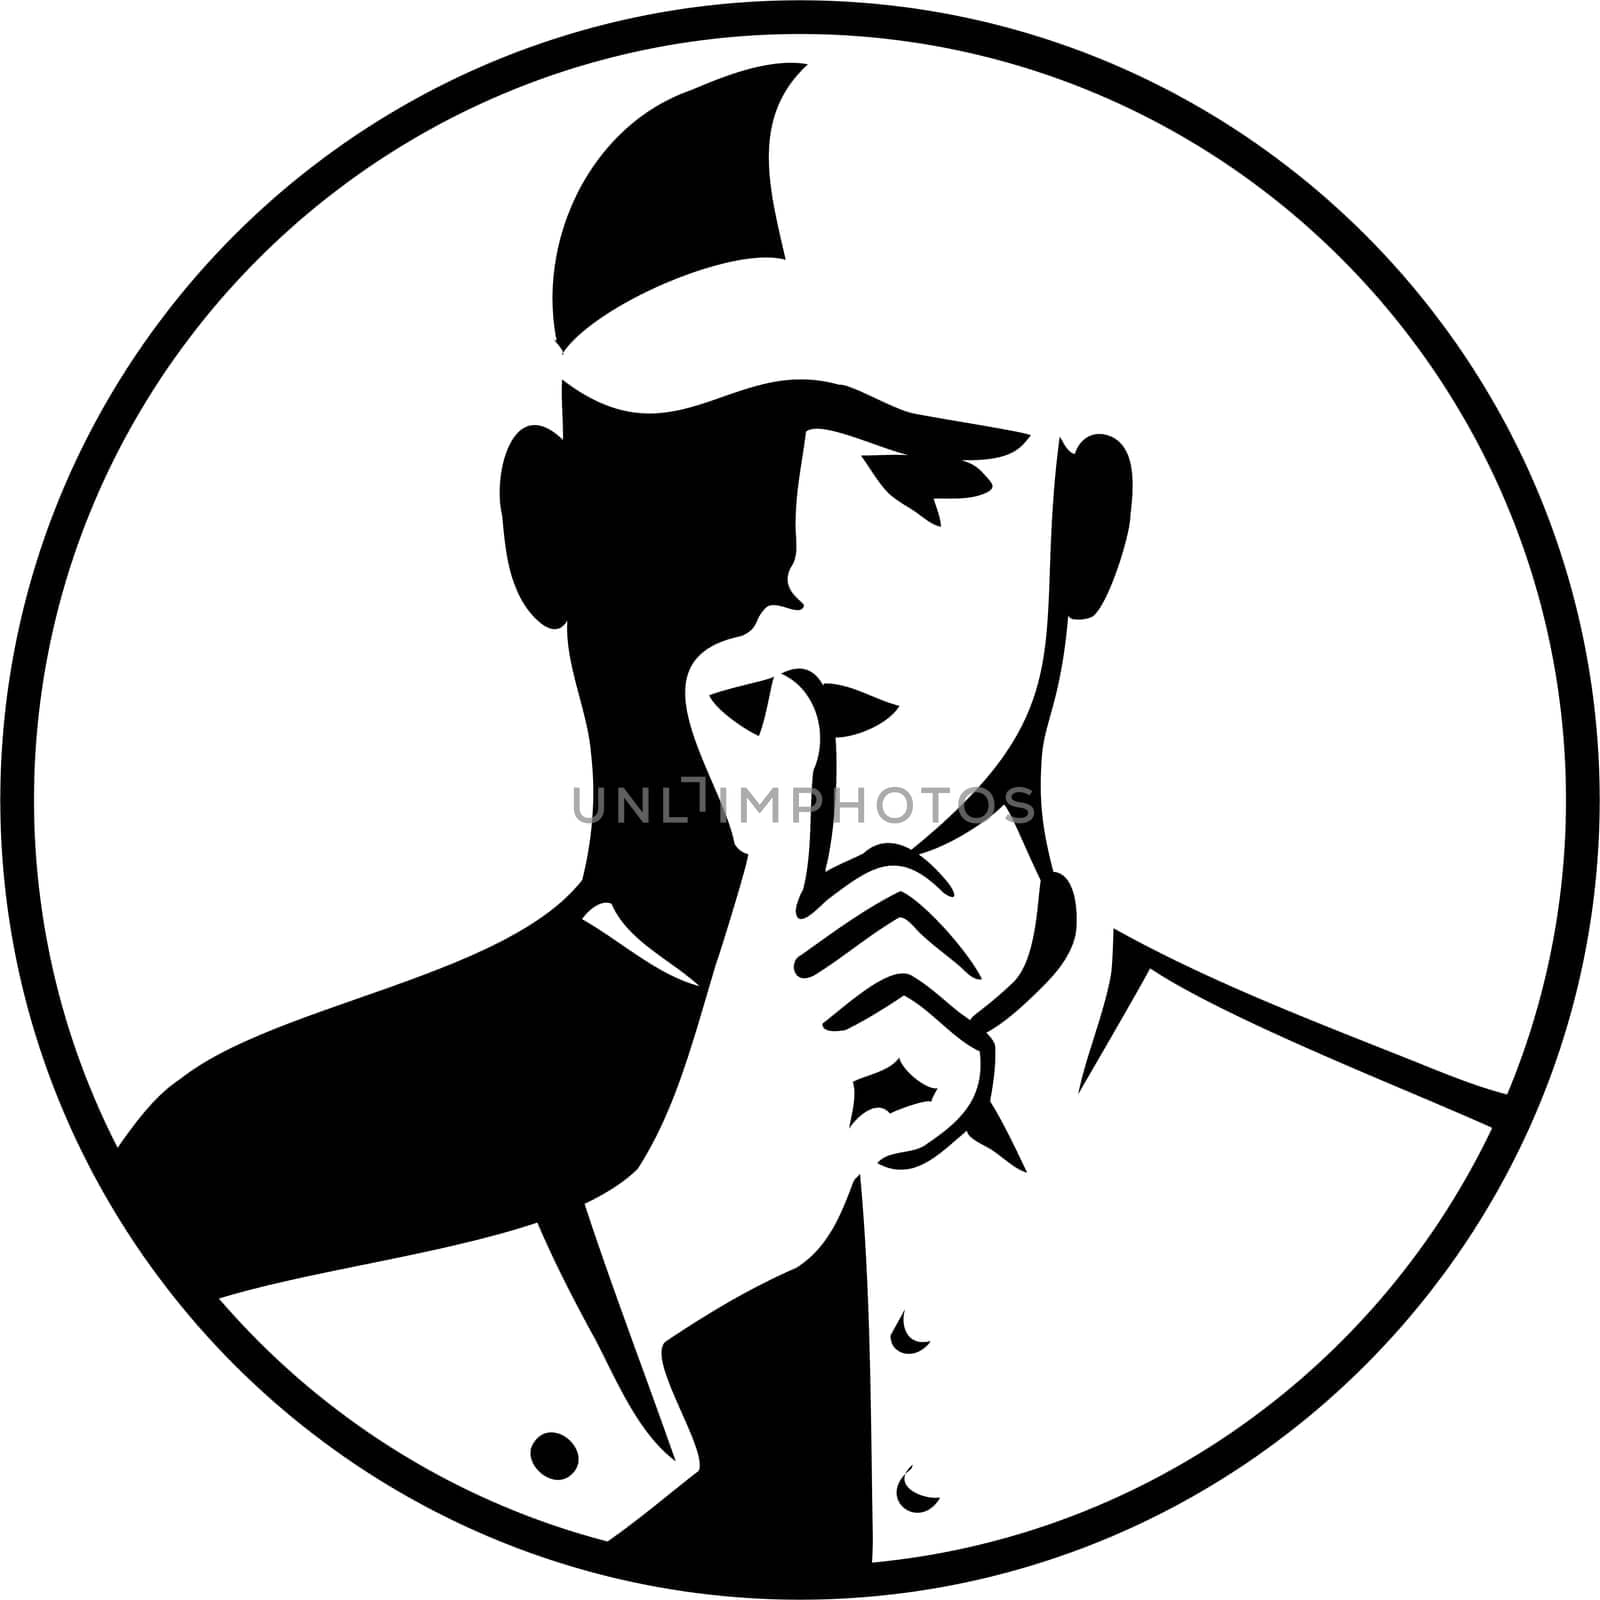 Noise Control Officer with Finger on Mouth Circle Retro Style by patrimonio